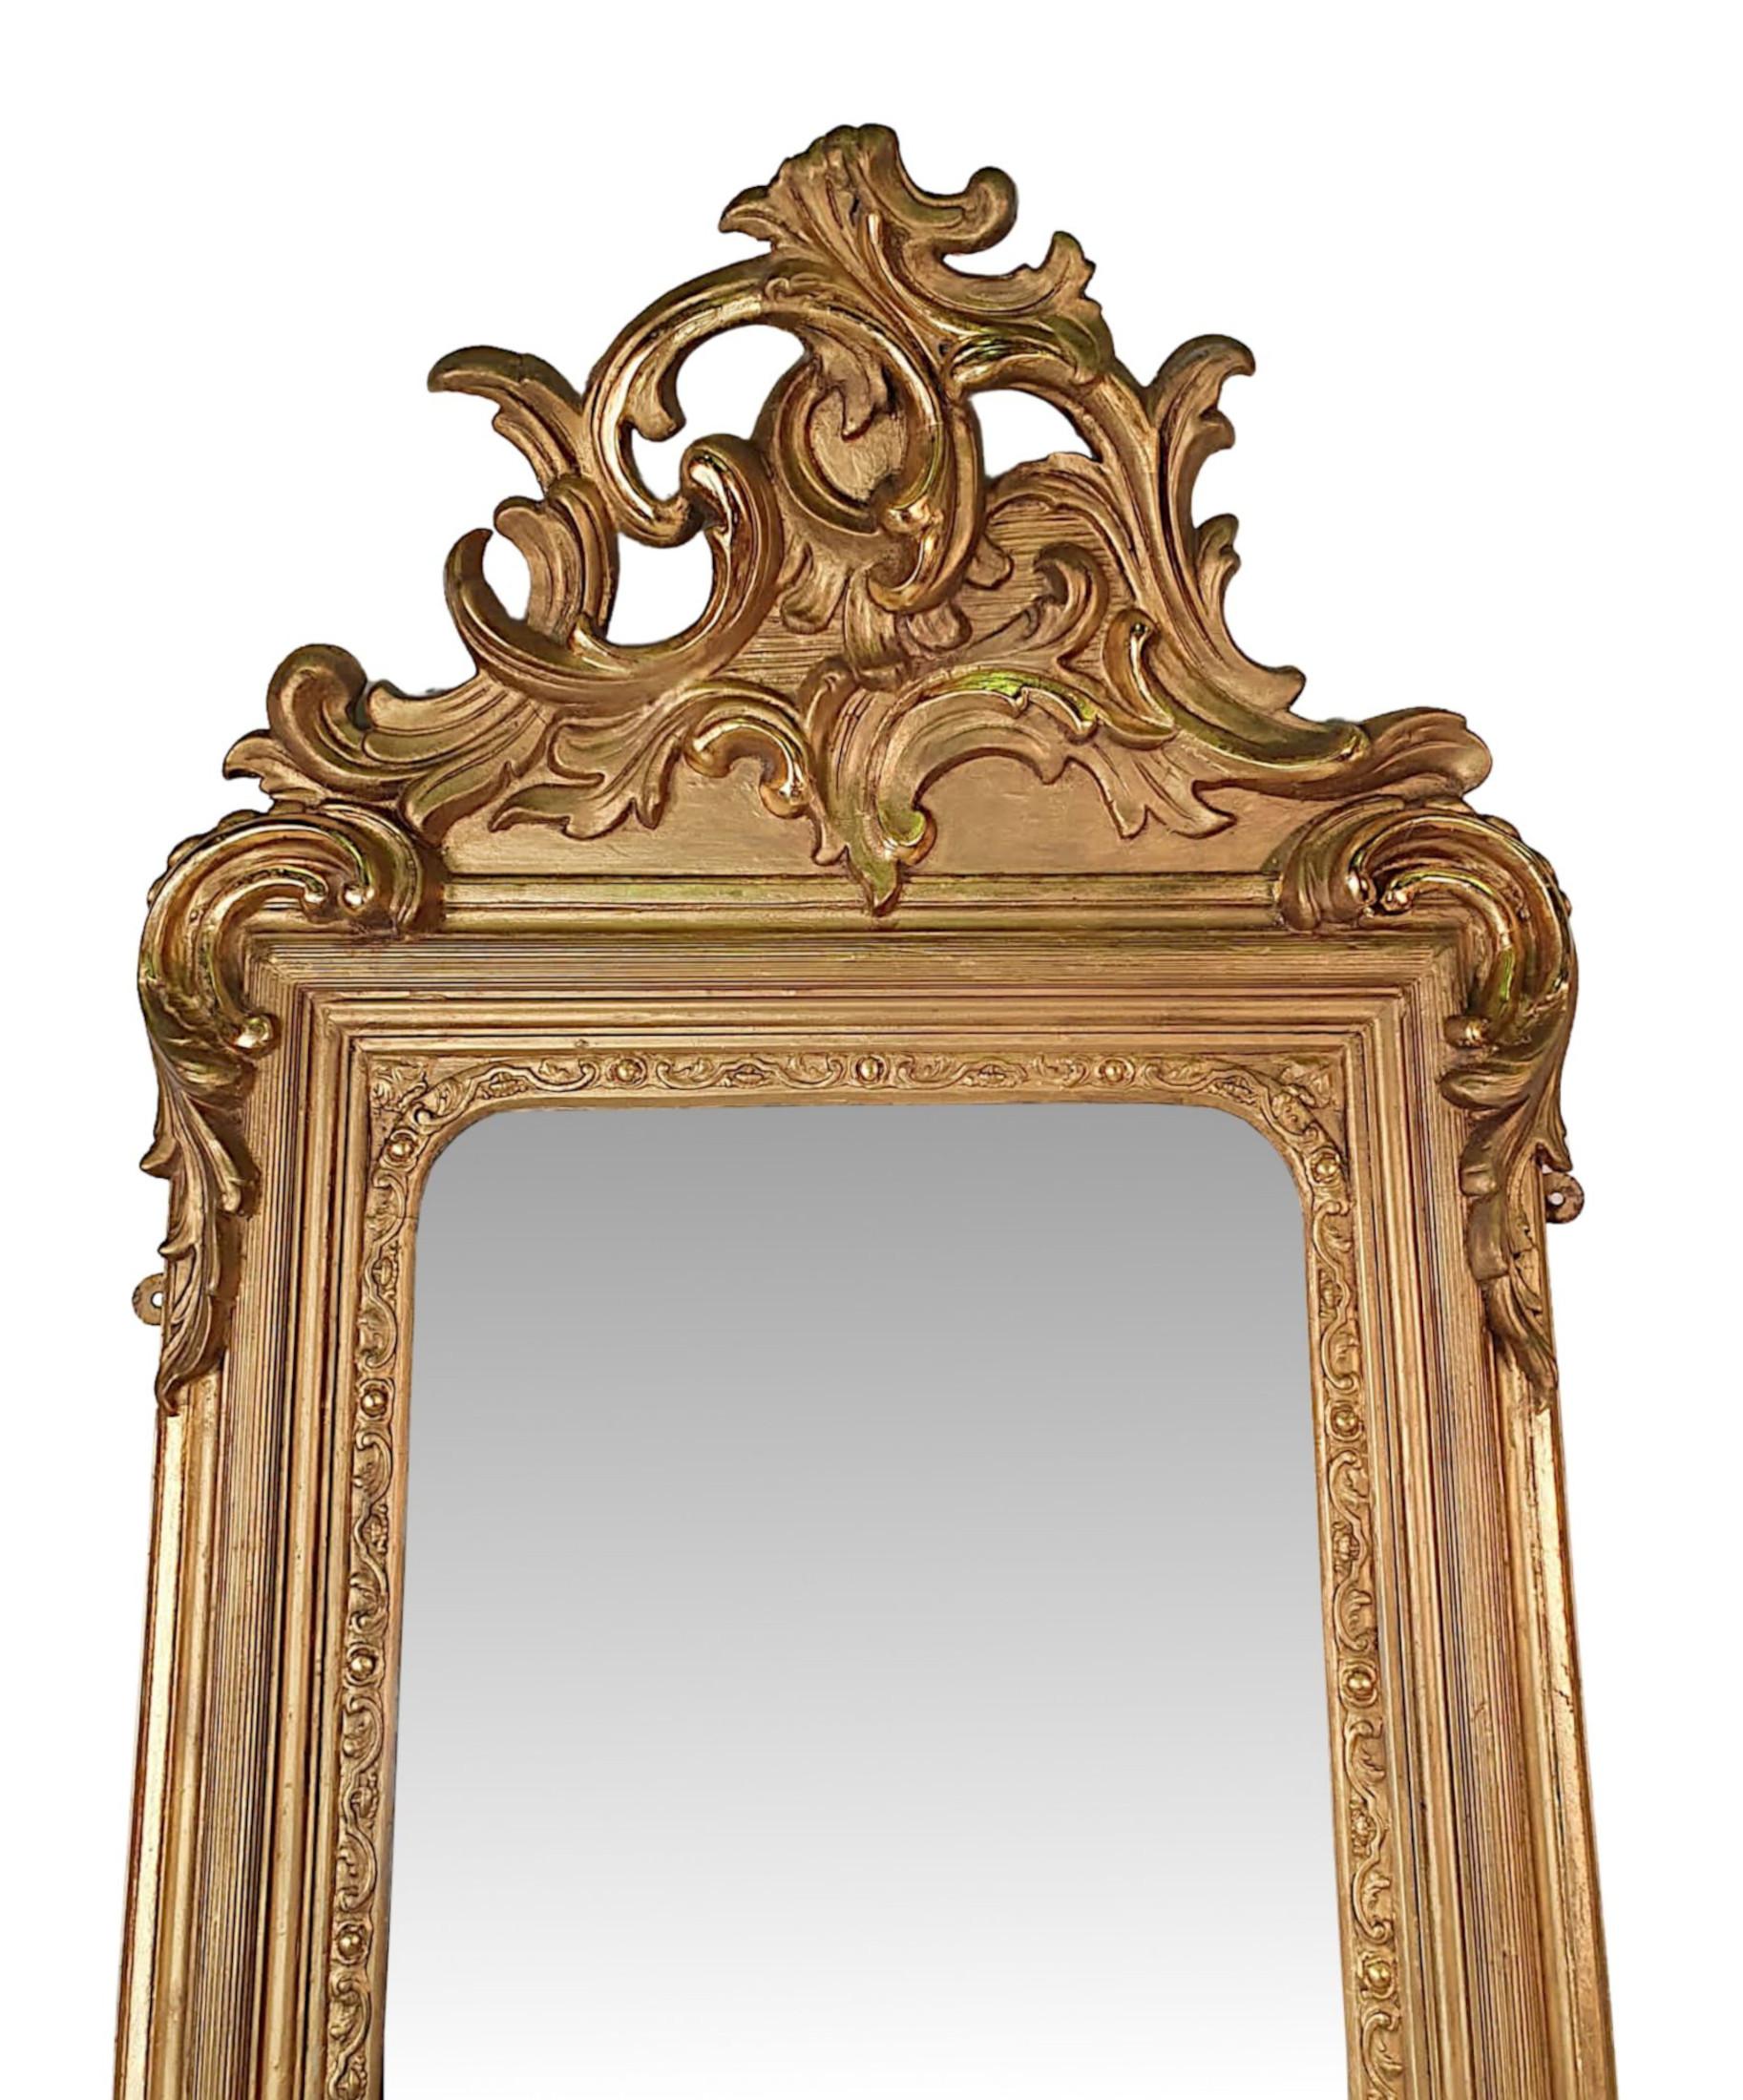 English Very Fine and Rare 19th Century Giltwood Pier or Dressing Mirror